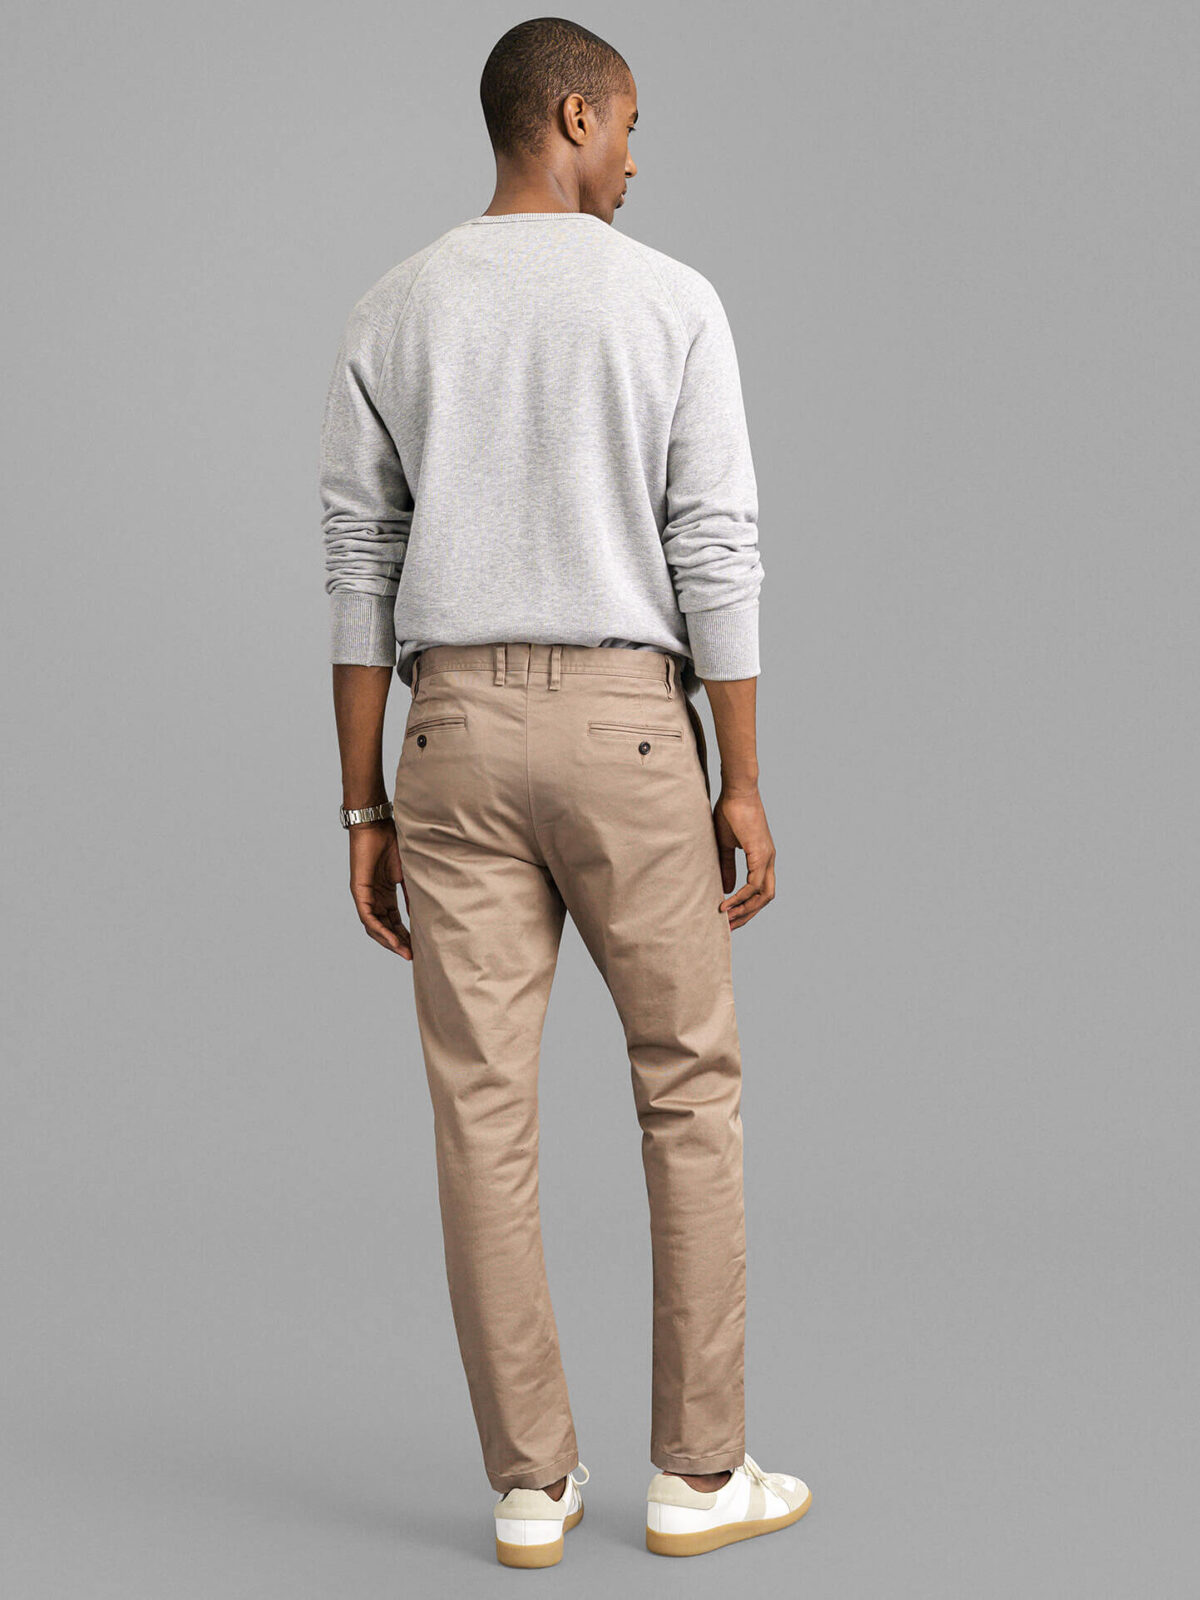 The History of Khaki: Anything But Drab